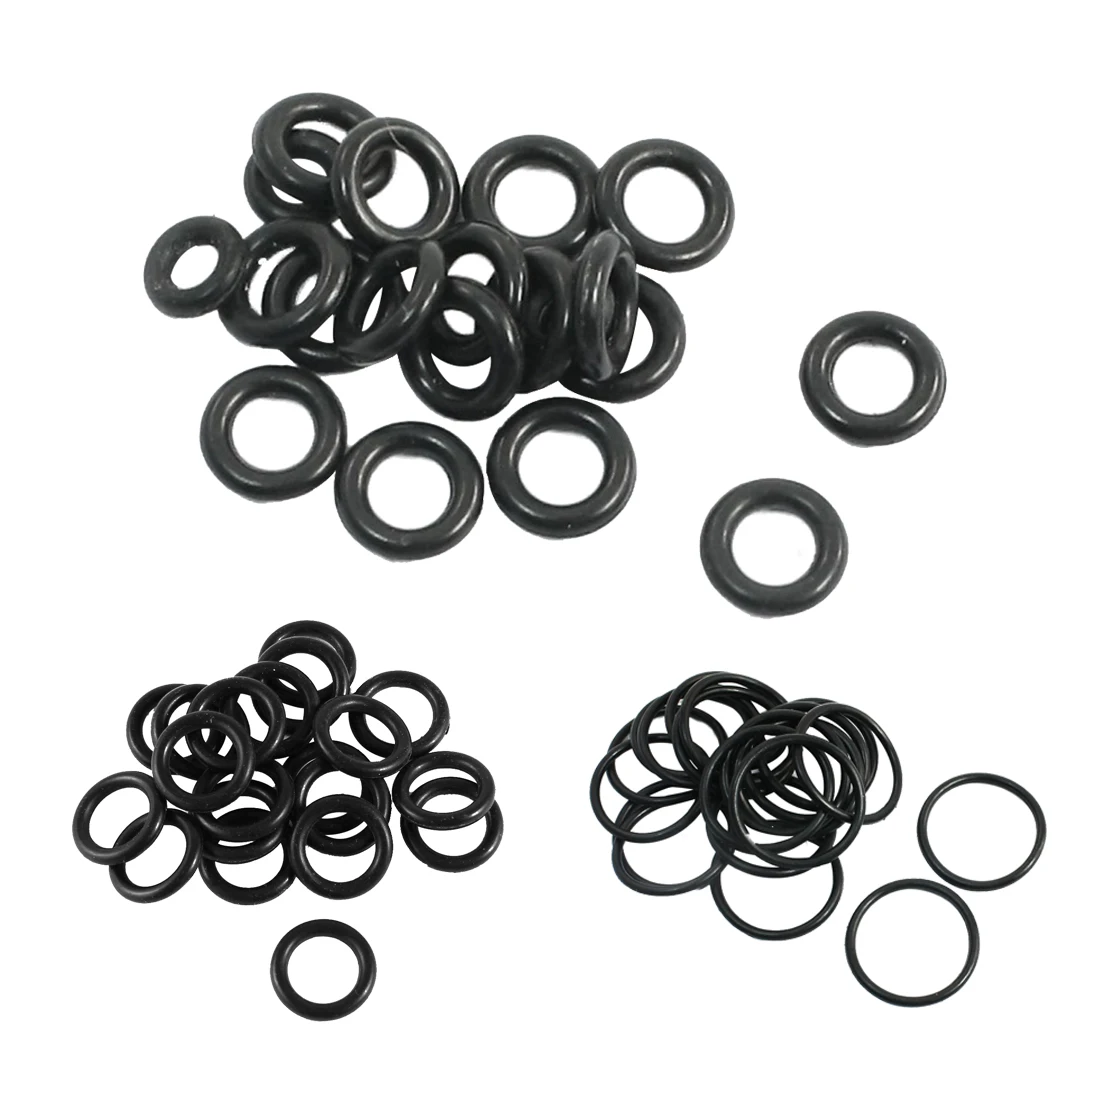 20x-black-rubber-oil-seal-sealed-o-rings-gasket-washers